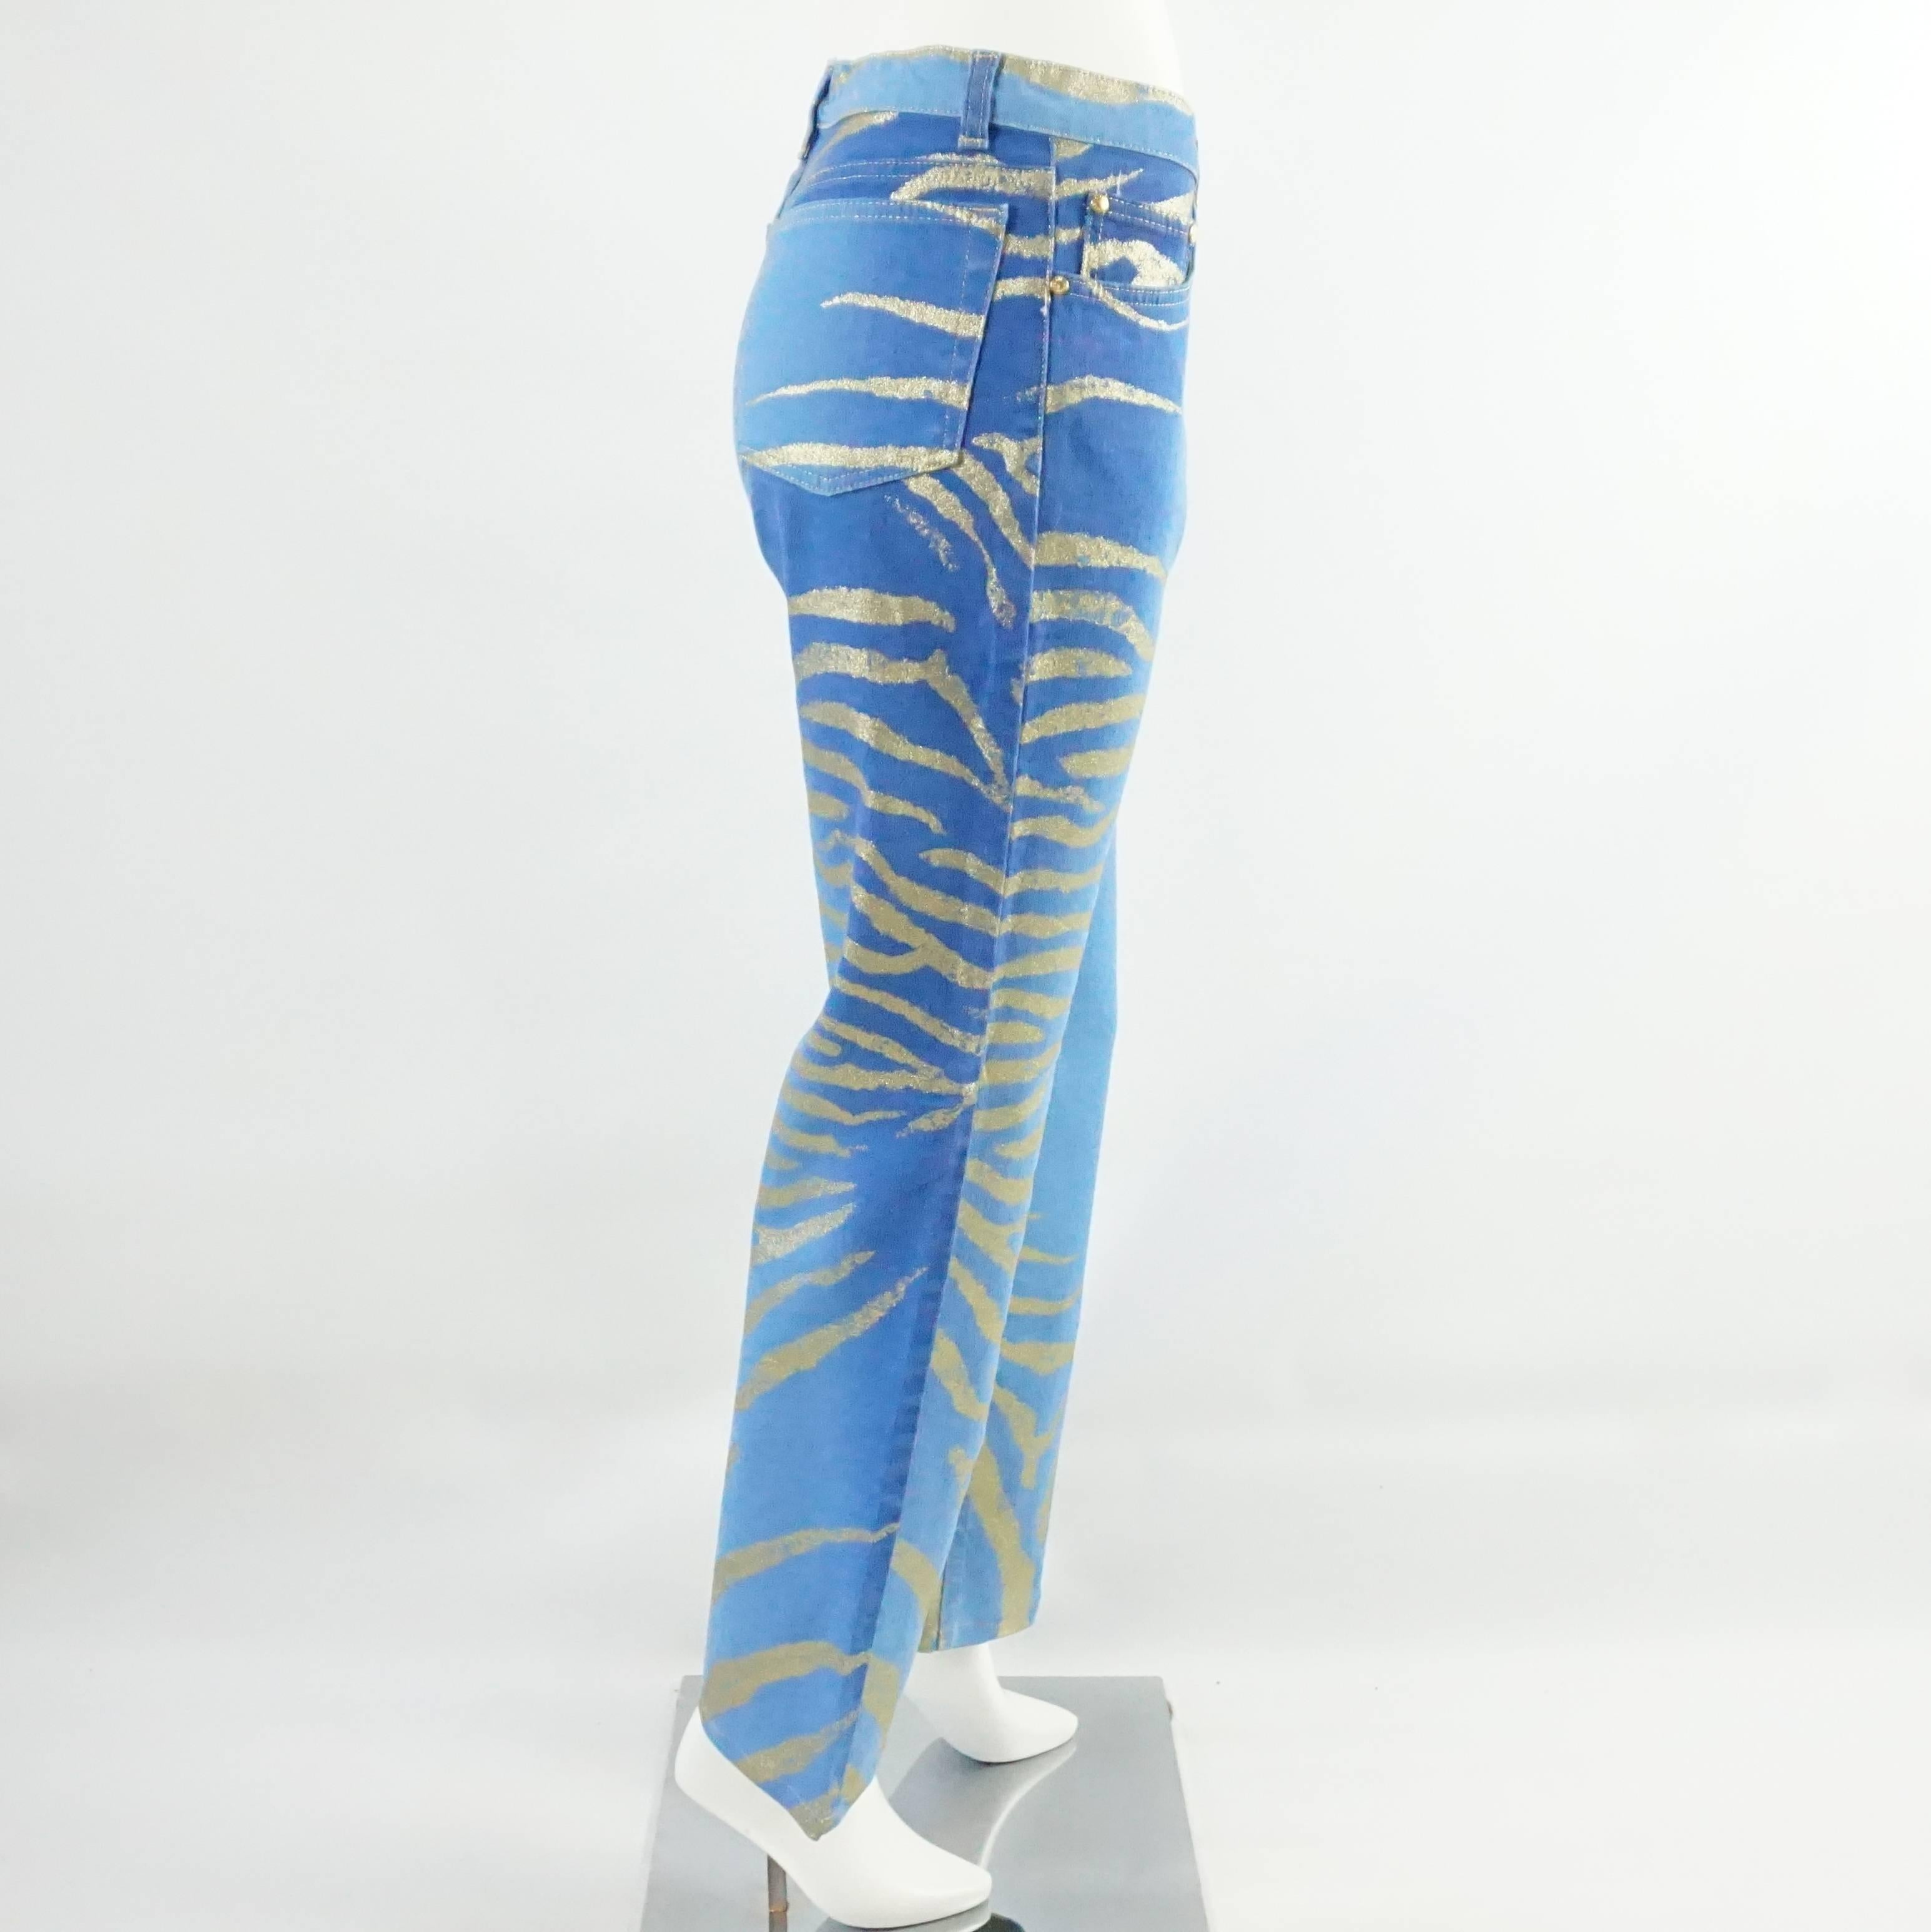 These Roberto Cavalli blue jeans have a gold glitter zebra print. They are in excellent condition with very minor staining and a couple pilled threads. Size small.

Measurements
Waist: 30"
Hips: 38.5"
Length: 41.5"
Inseam: